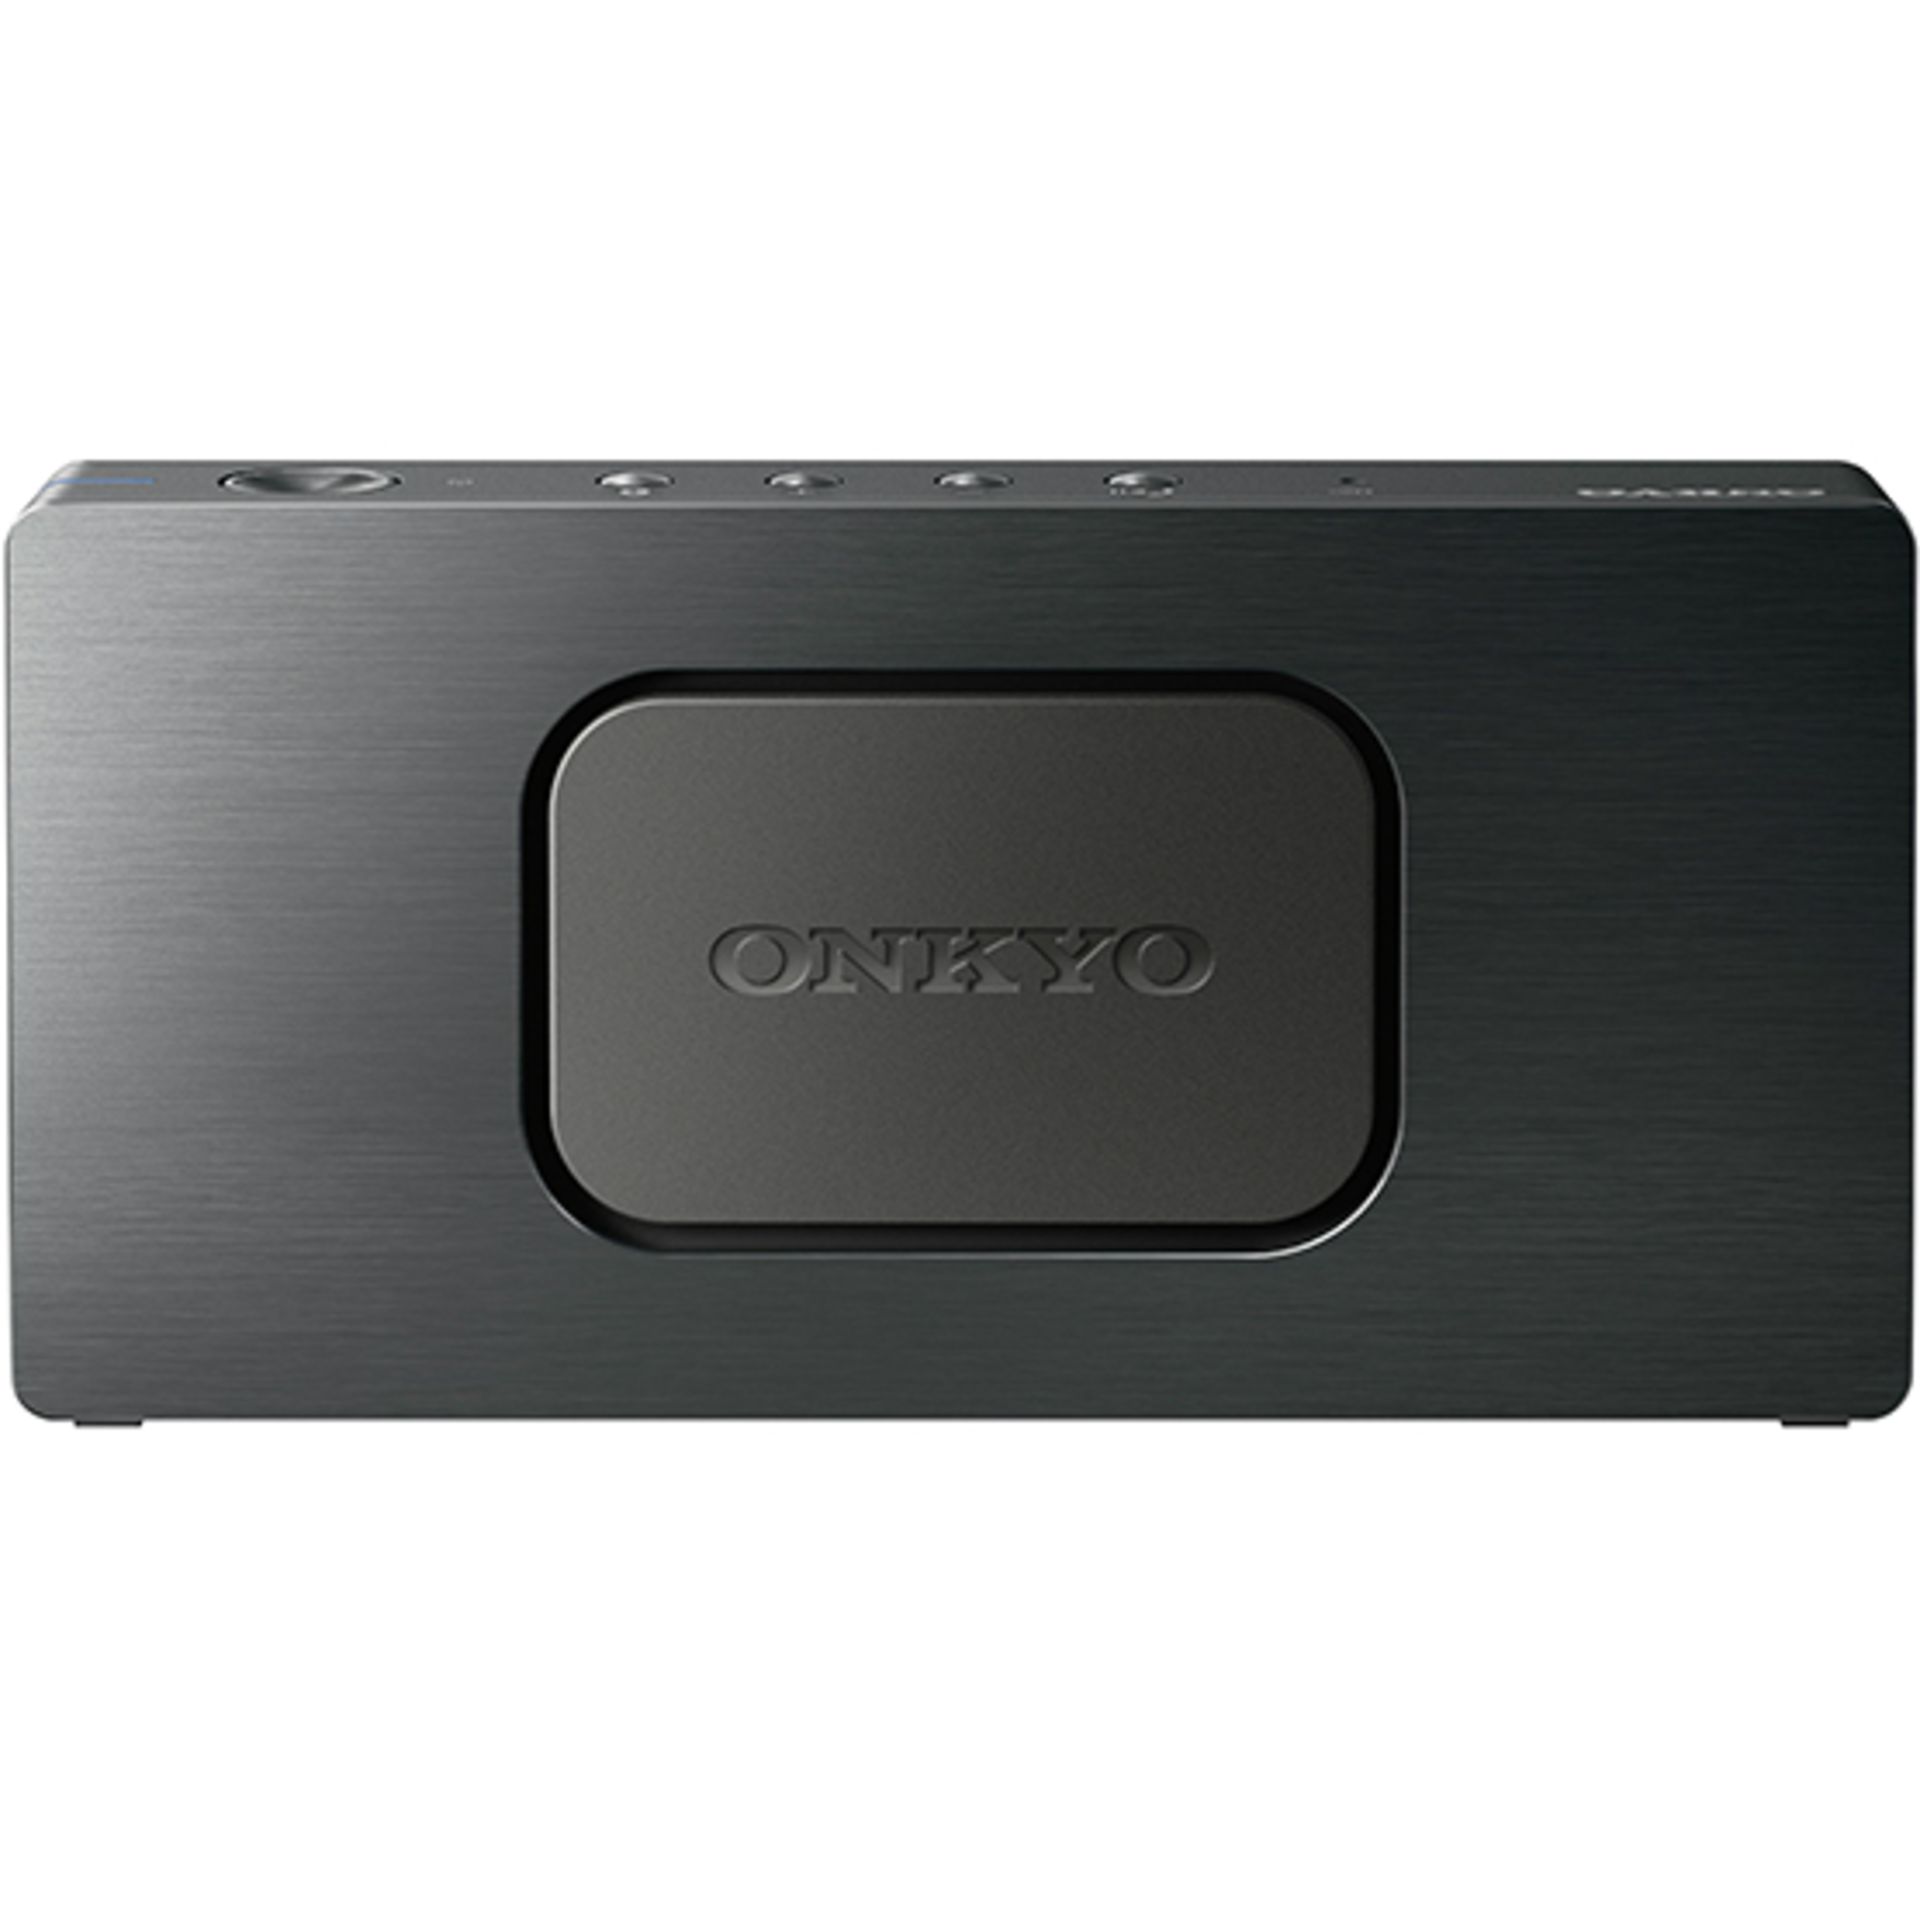 V Brand New Onkyo T3 Lightweight Portable Bluetooth Speaker with USB output for Charging Devices - 8 - Image 2 of 4